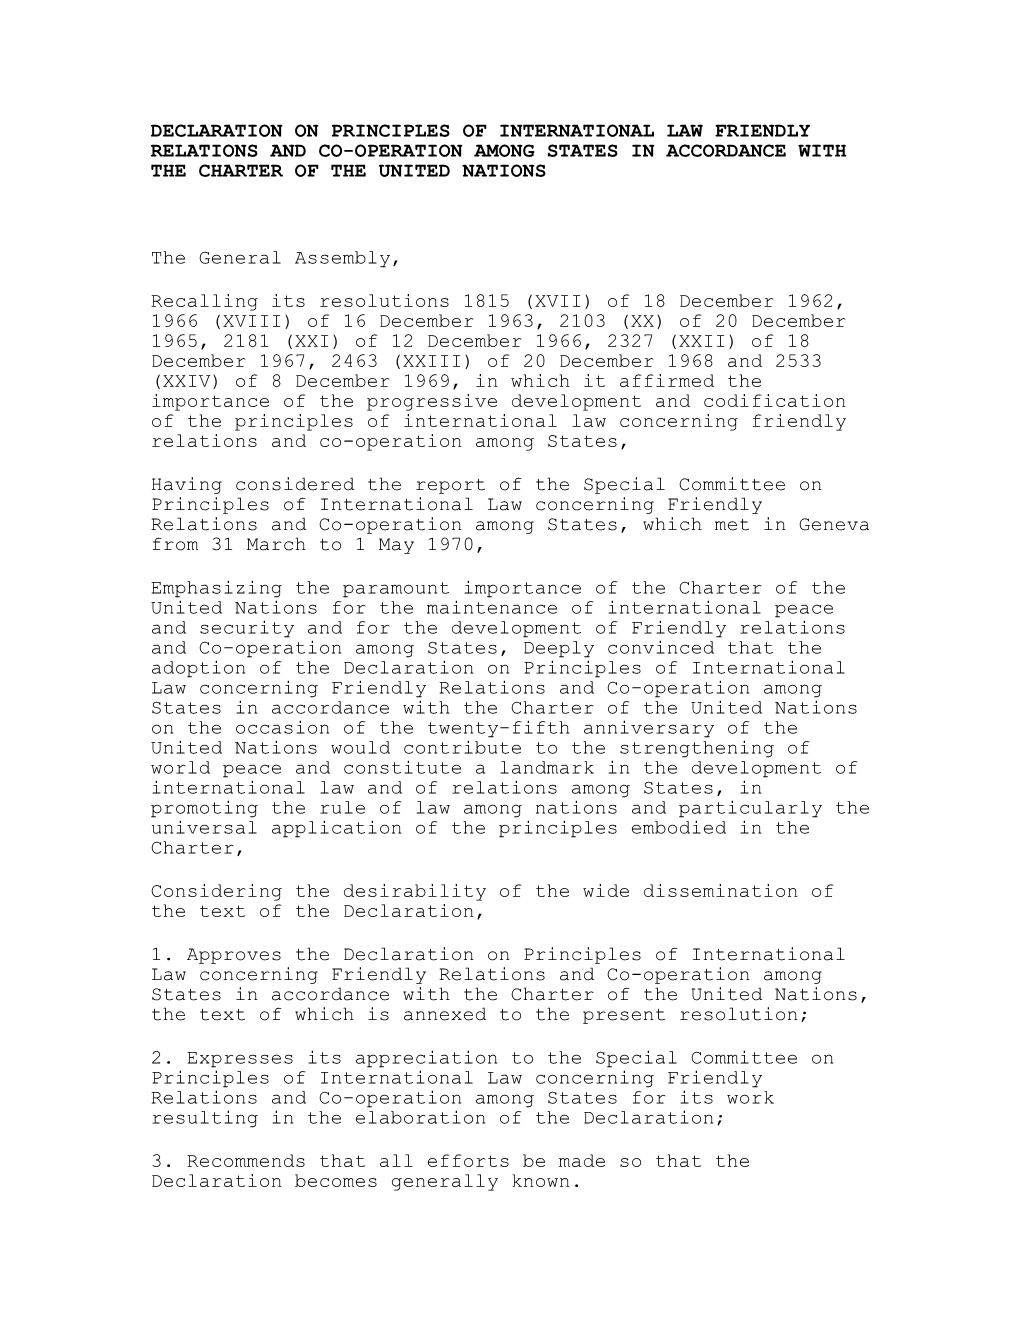 Declaration on Principles of International Law Friendly Relations and Co-Operation Among States in Accordance with the Charter of the United Nations